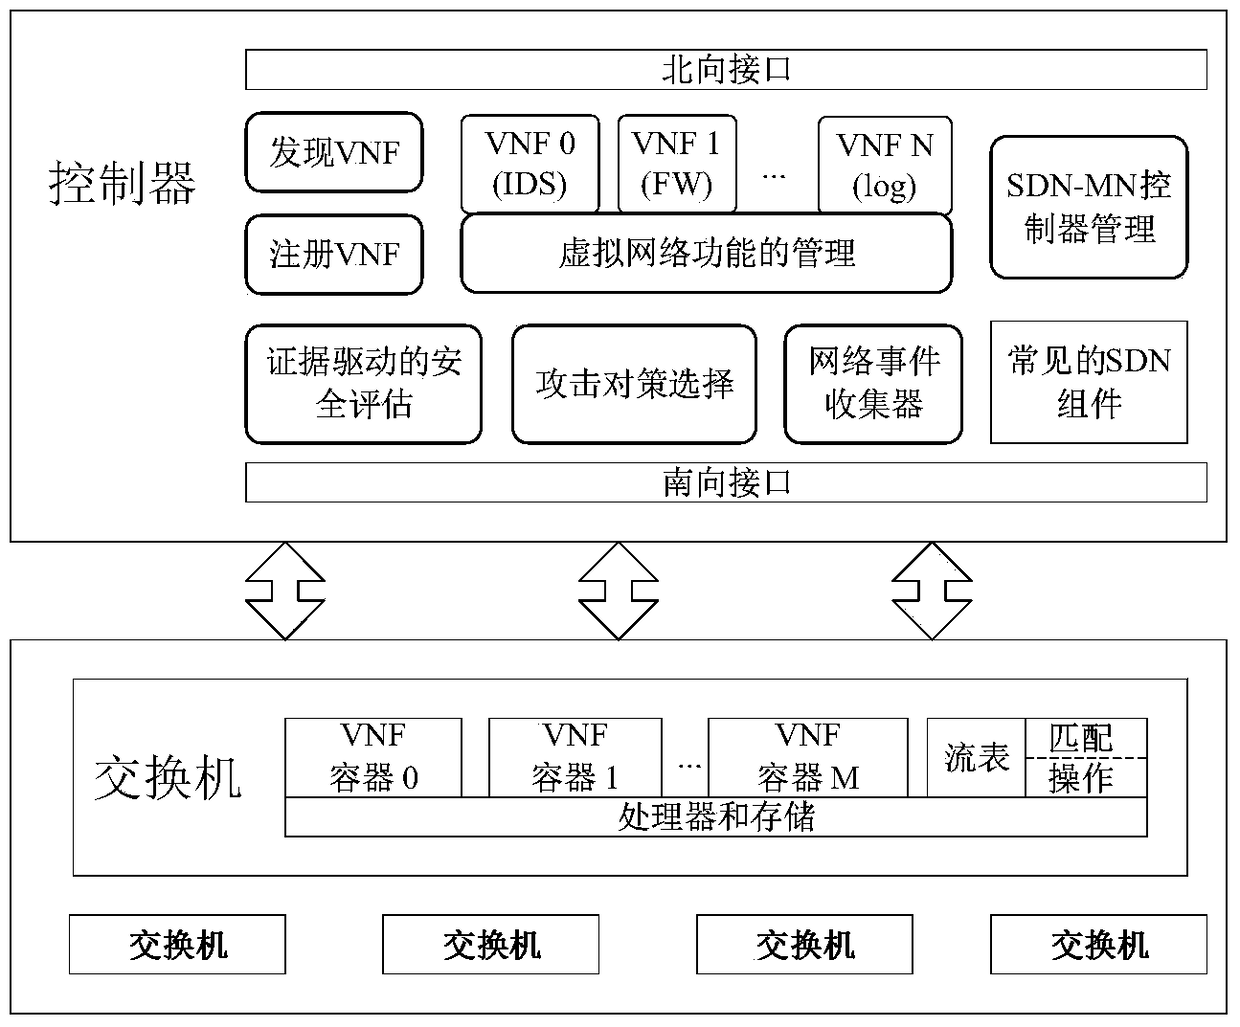 Multi-level attack mitigation method for 5G network based on SDN and NFV